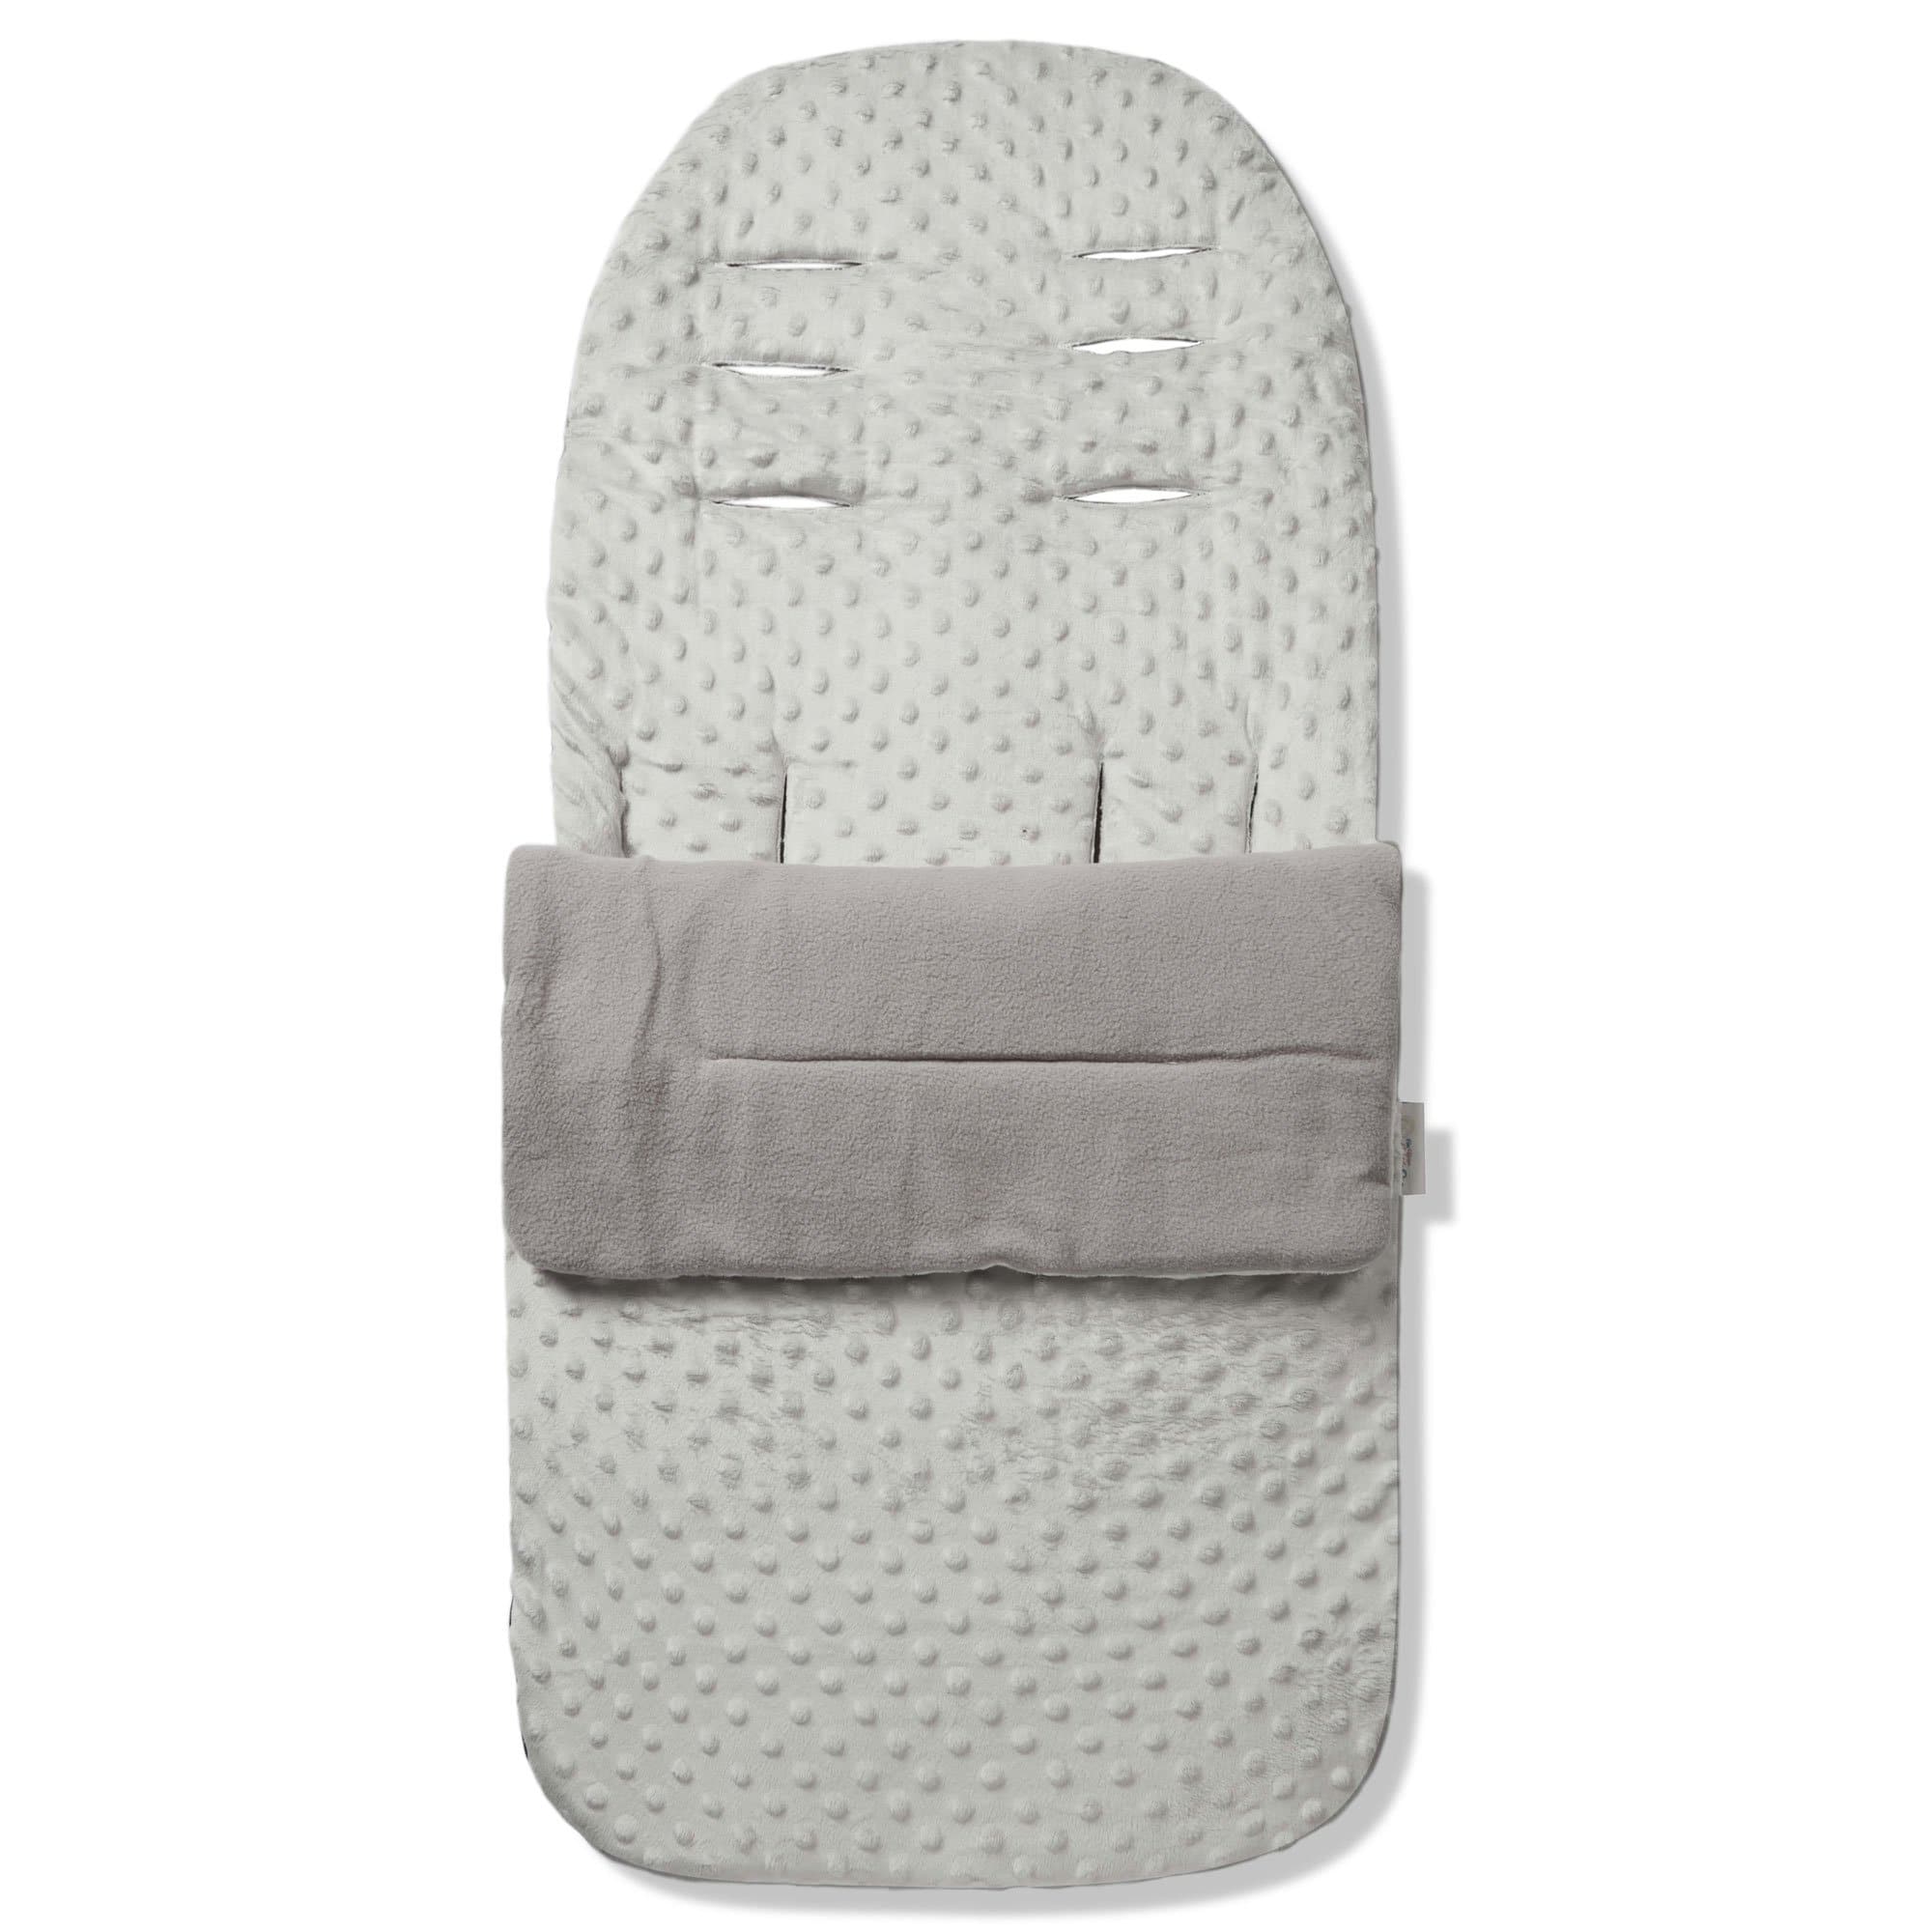 Dimple Footmuff / Cosy Toes Compatible with Silver Cross - Grey / Fits All Models | For Your Little One